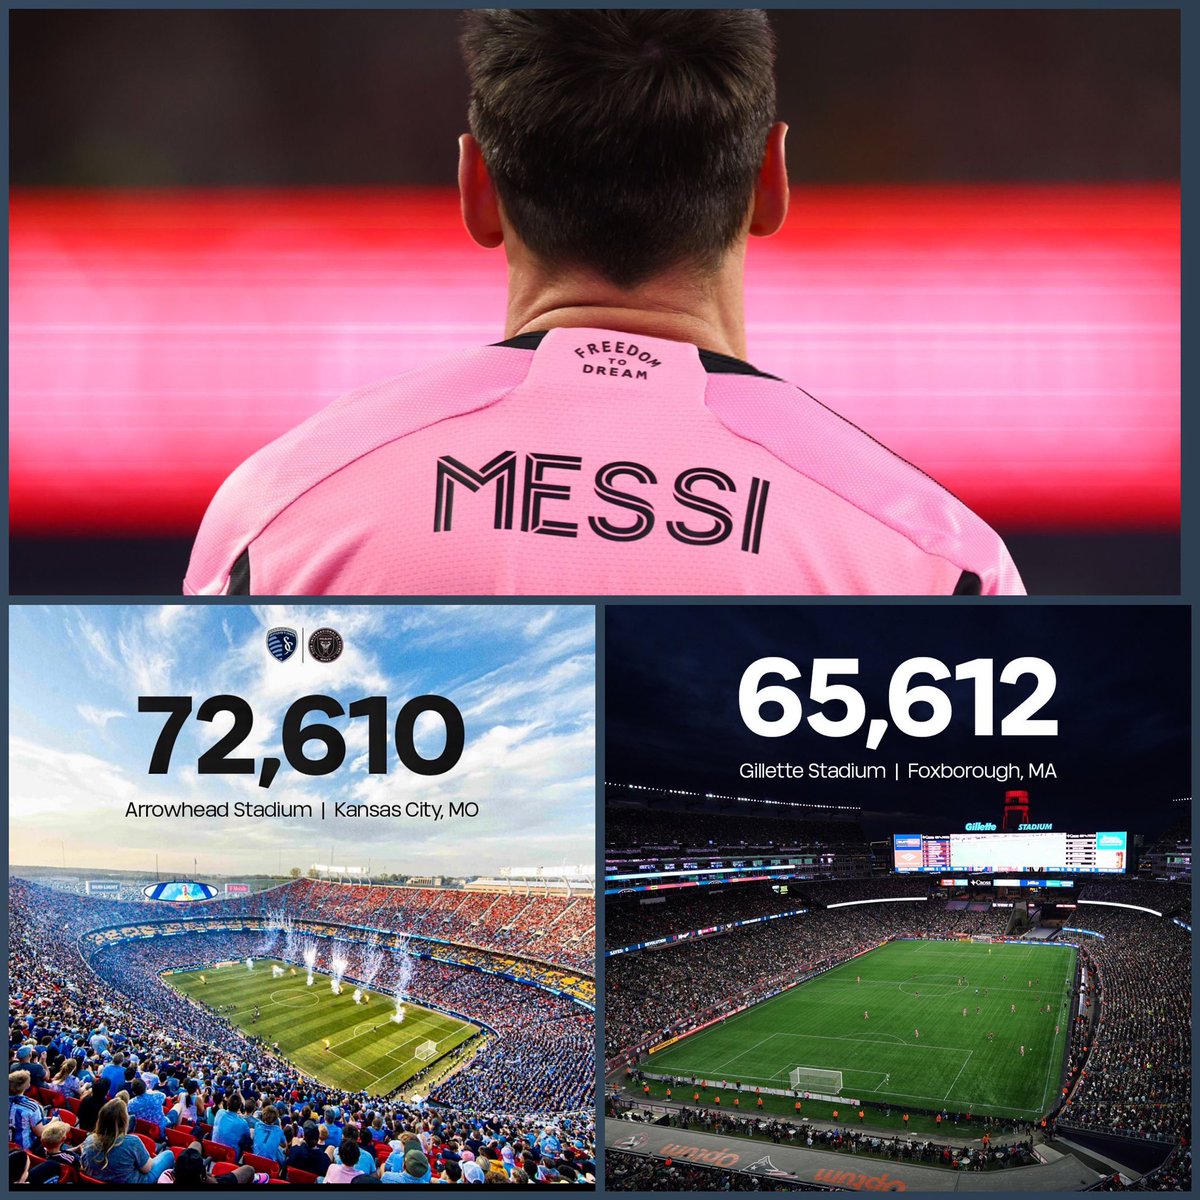 last two weeks: 72,610 spectators.
last night: 65,612 spectators.

lionel messi selling out stadiums in the us like it’s so normal.

they all come to see him and he always delivers!

🐐🐐🐐🐐🐐